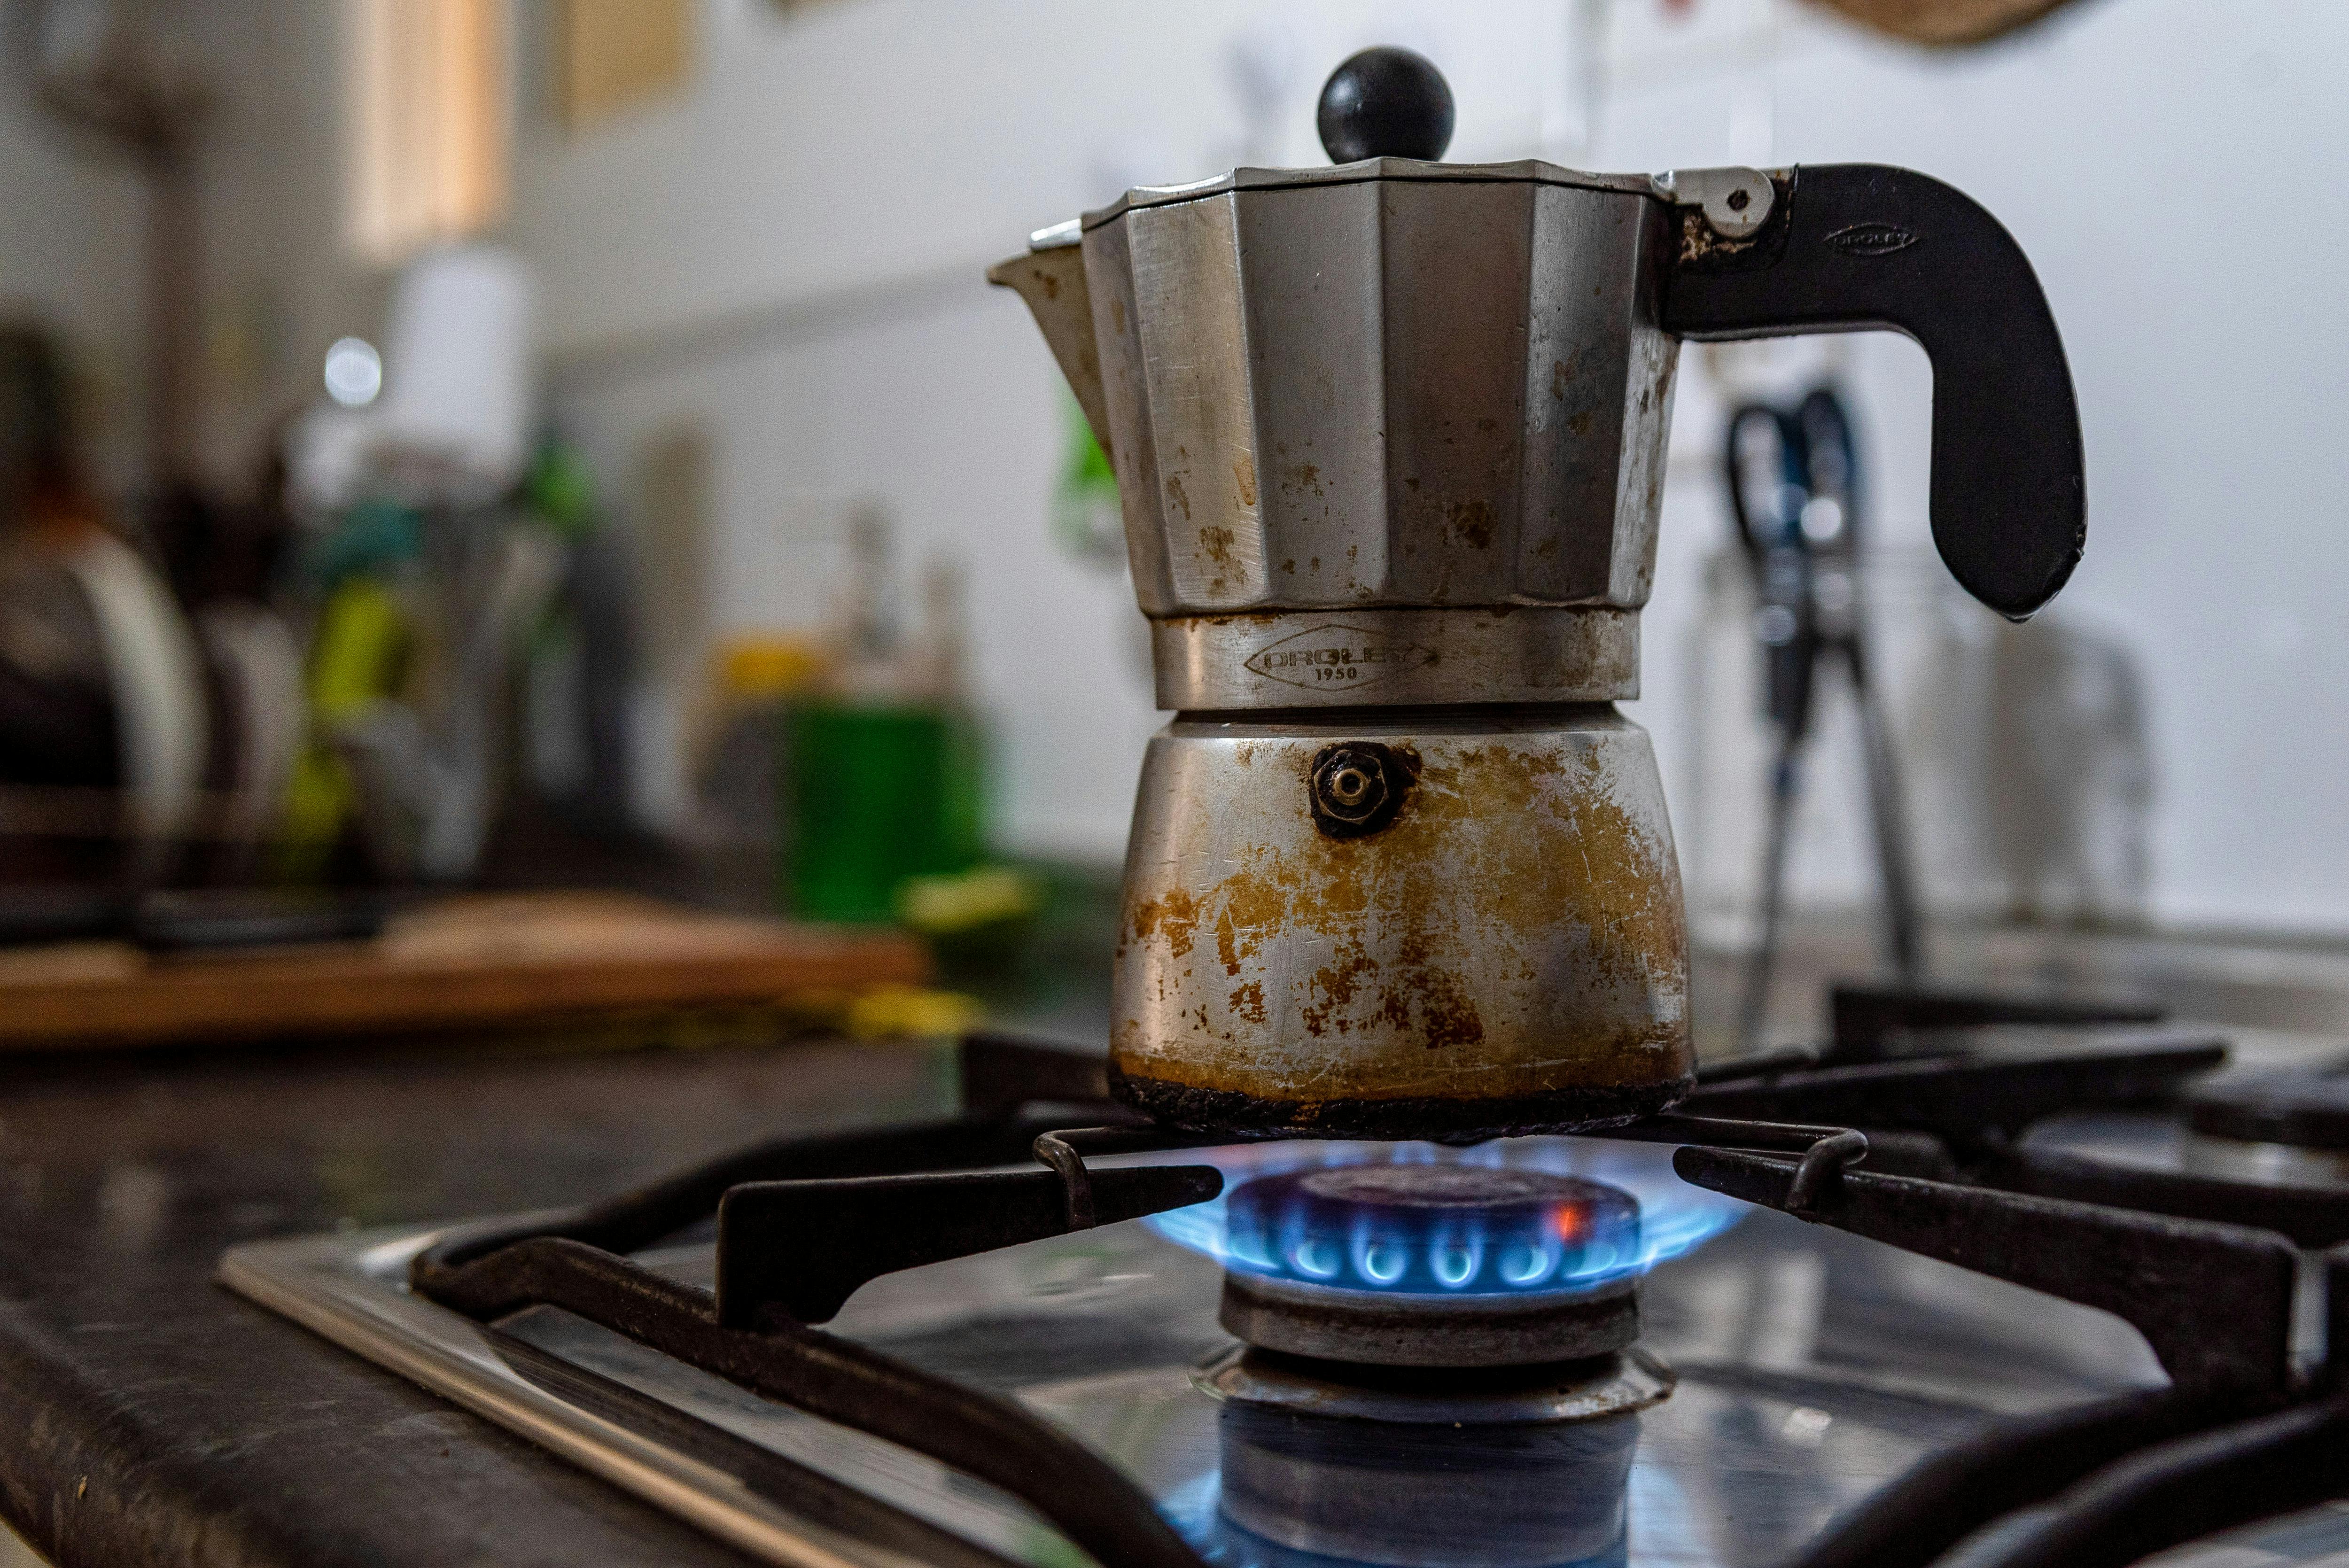 The Problem With Gas Stoves - Undecided with Matt Ferrell